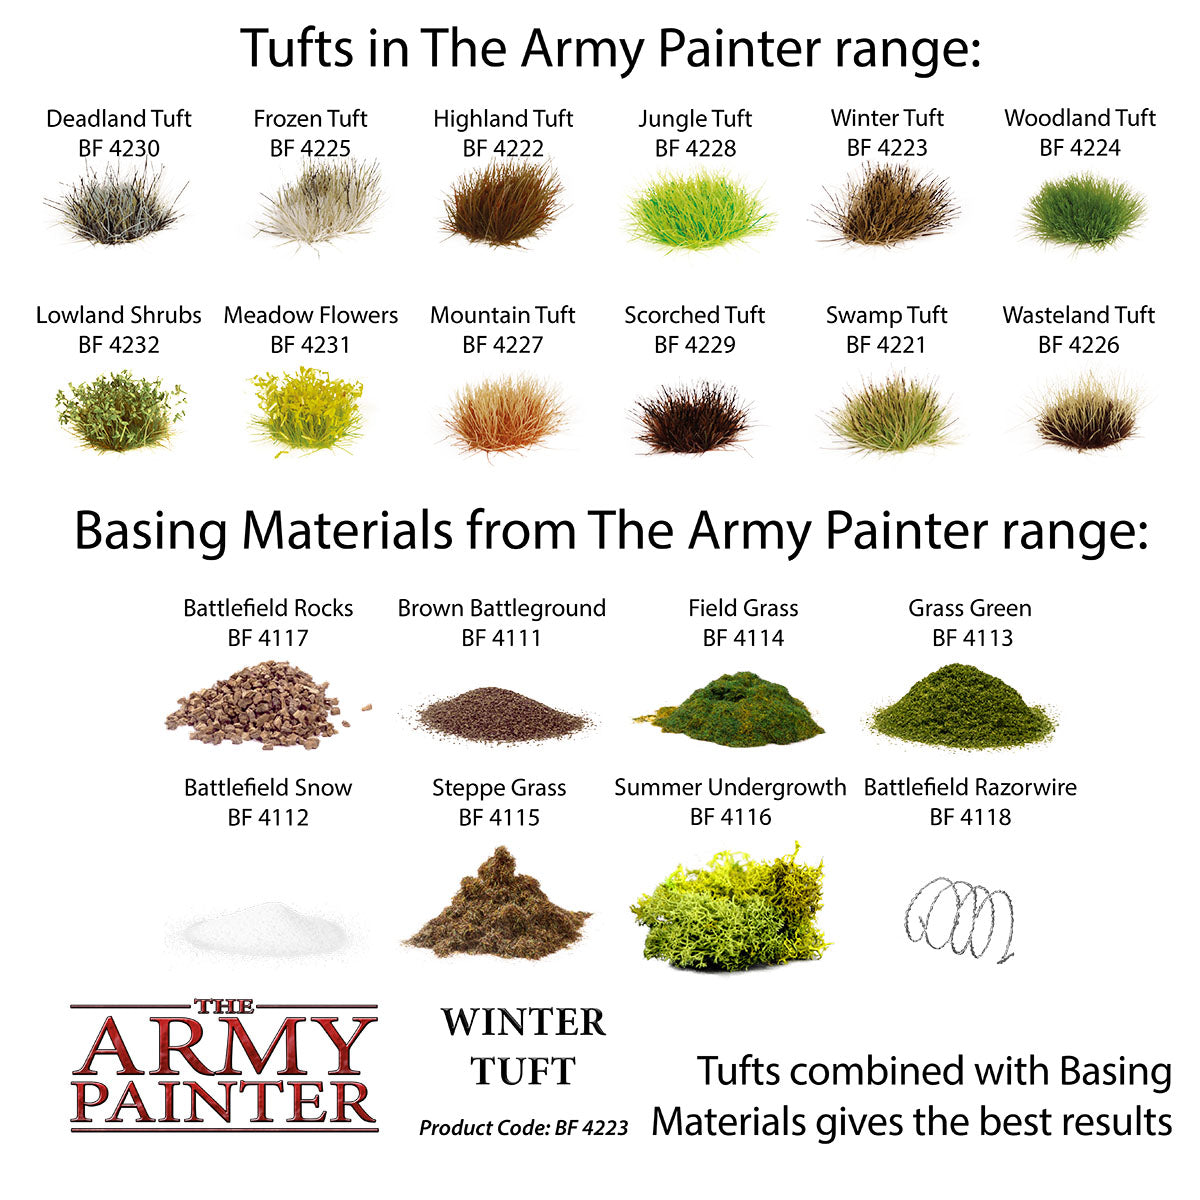 The Army Painter - Winter Tuft BF4223